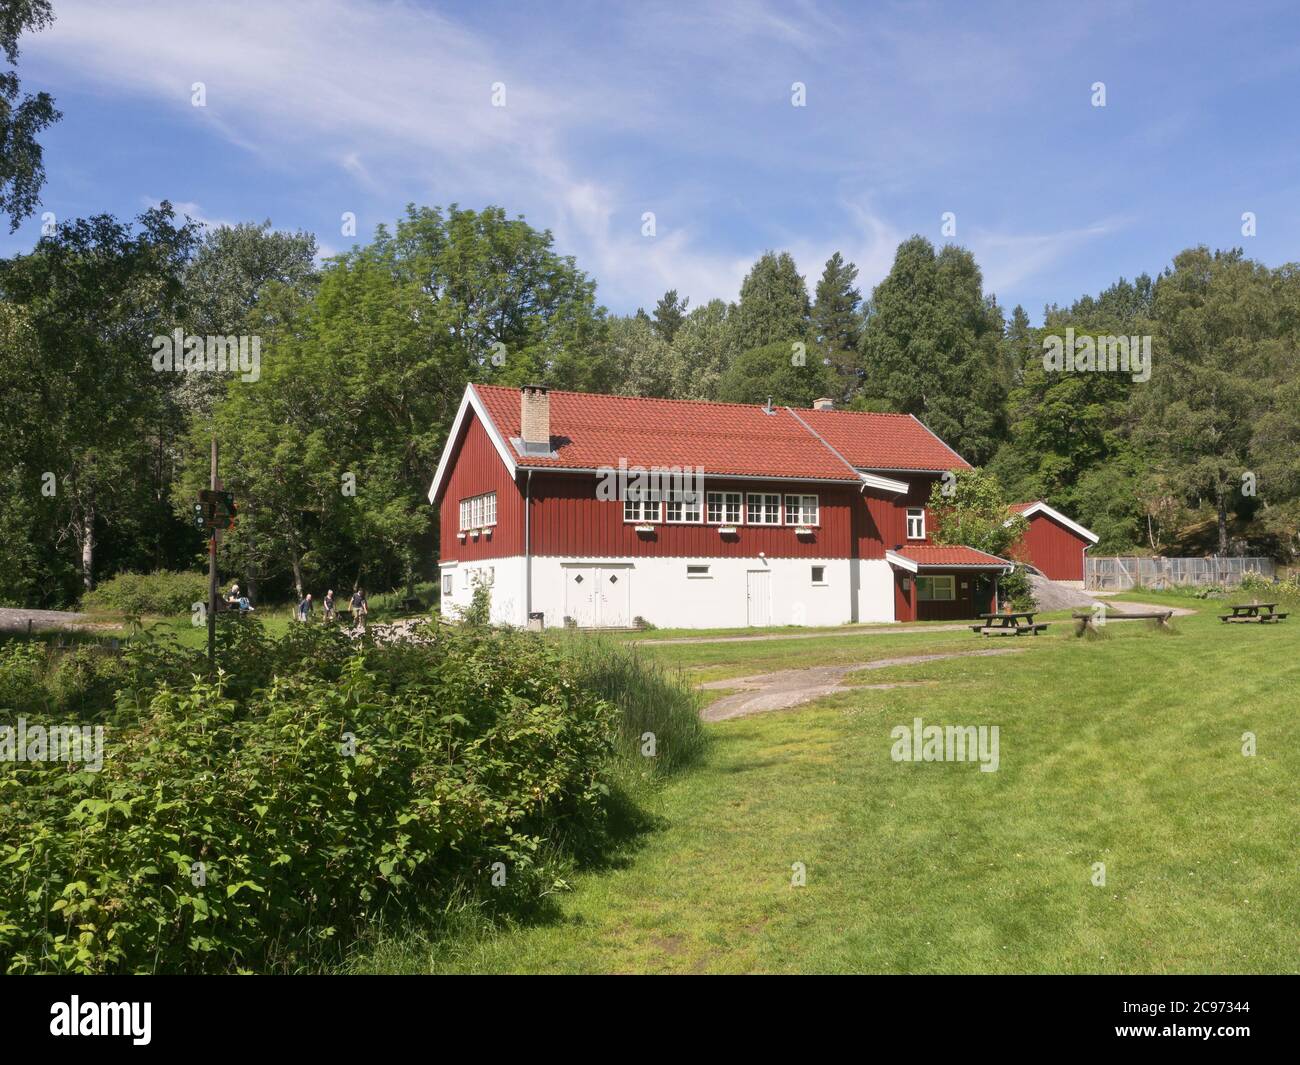 Sandbakken cafe i  Ostmarka, Oslo Norway, catering for hikers and skiers in the forests since 1959, formerly a small farm Stock Photo